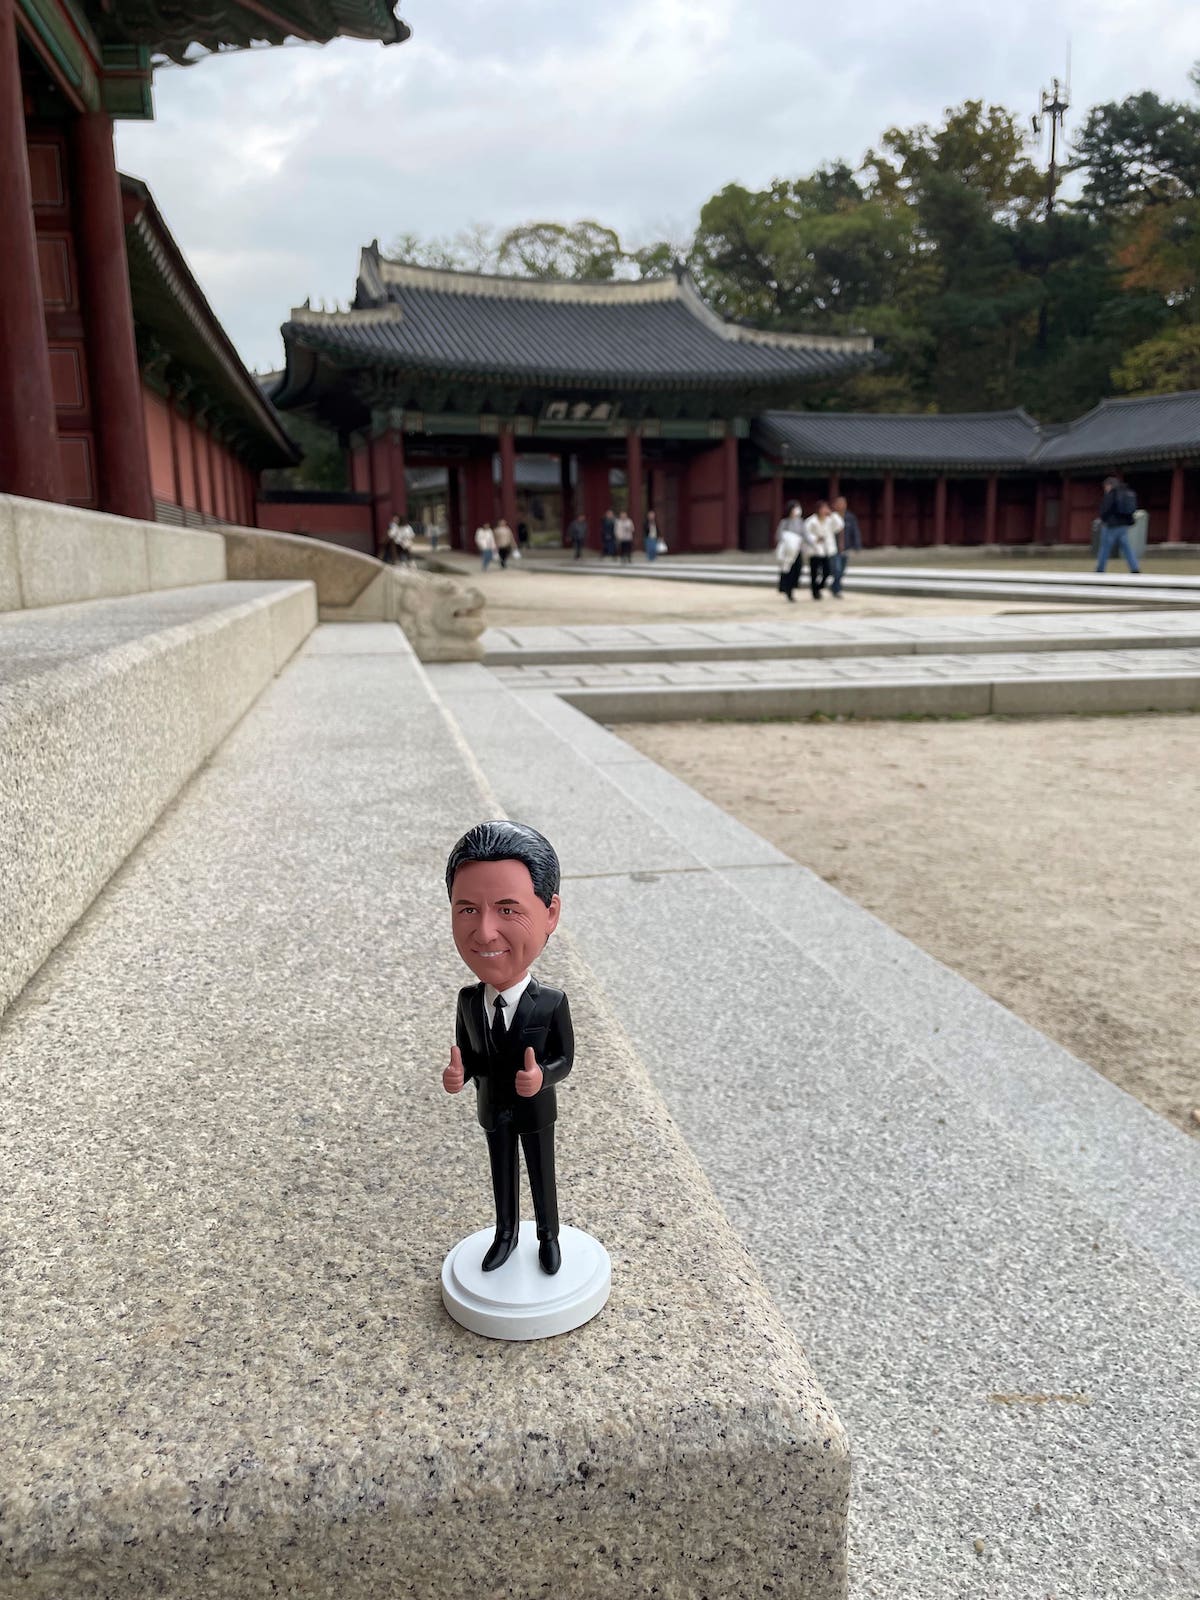 Little Jimmy at Changdeokgung Palace in Seoul, South Korea